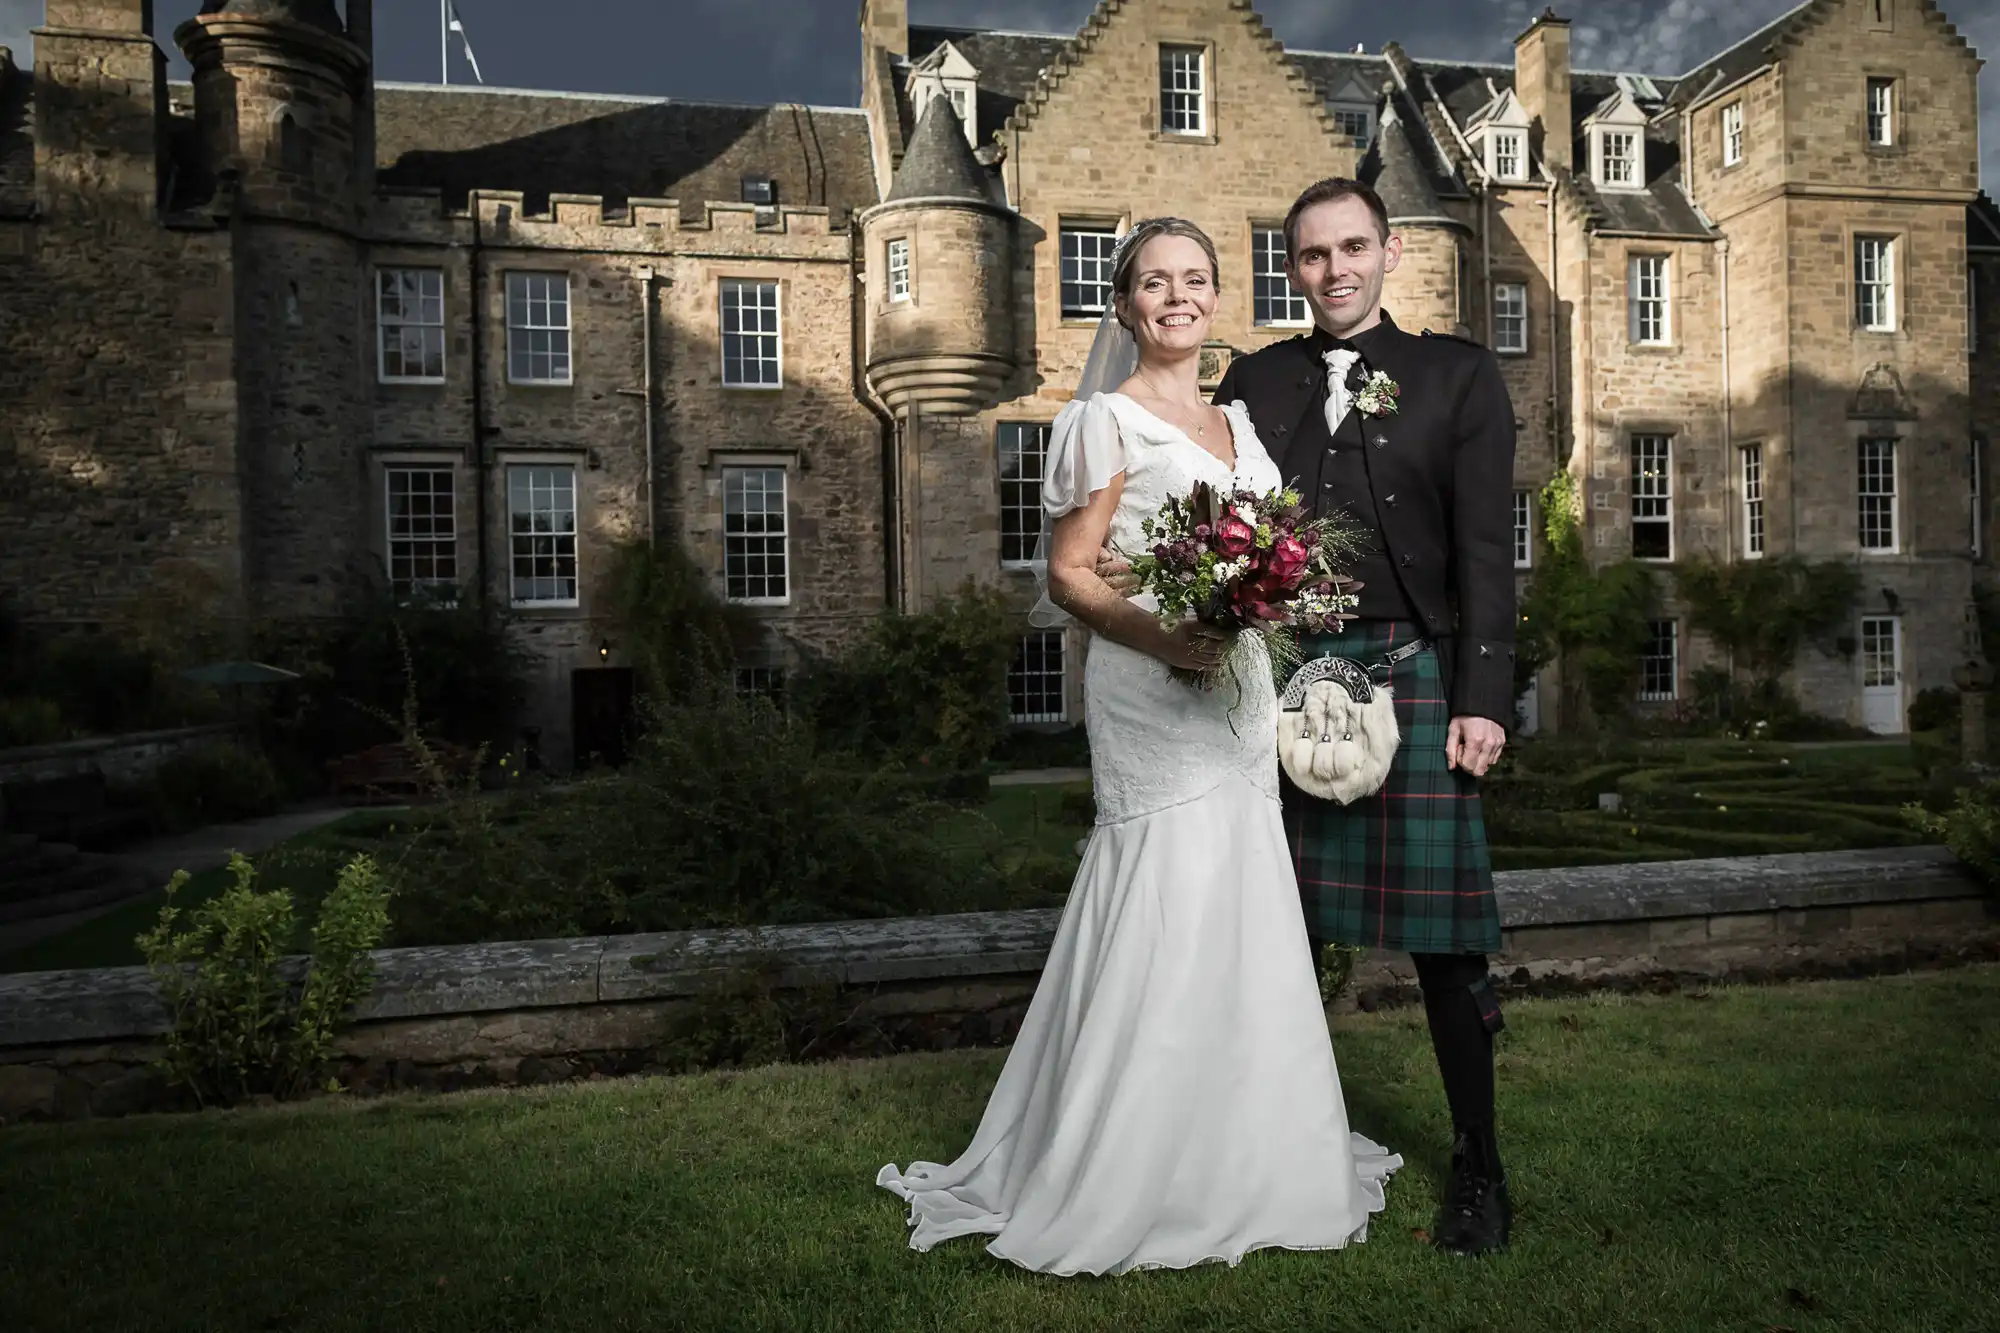 A bride and groom in wedding attire, the groom wearing a kilt, stand smiling in front of a historic stone castle under a cloudy sky.